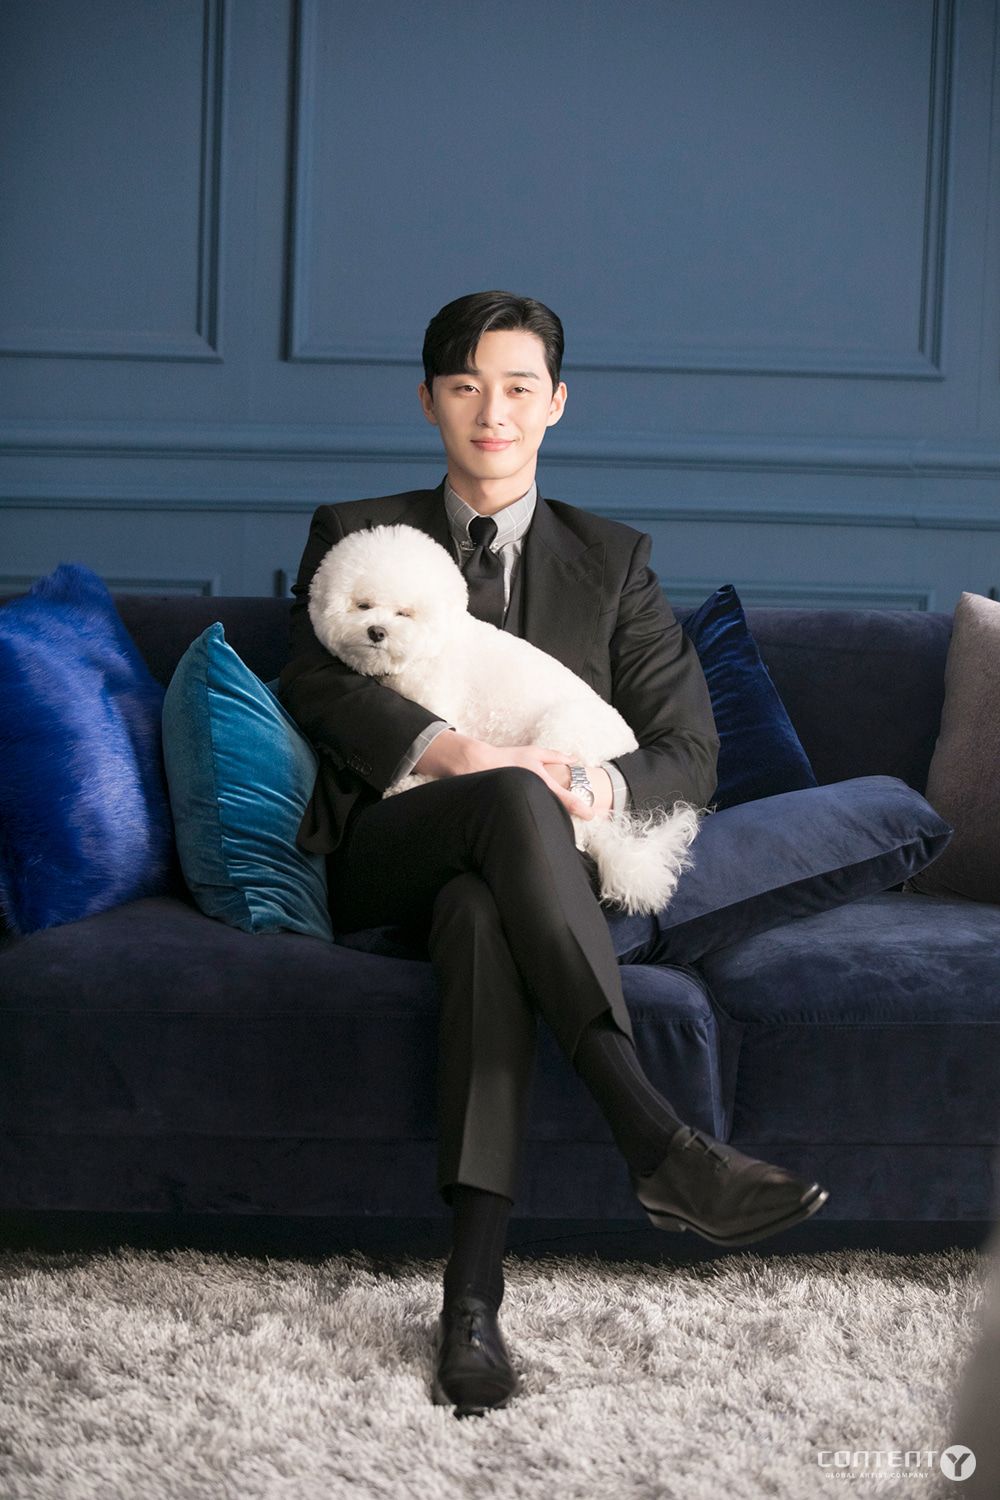 Picture Of Park Seo Joon And His Adorable Dog To Brighten Up Your